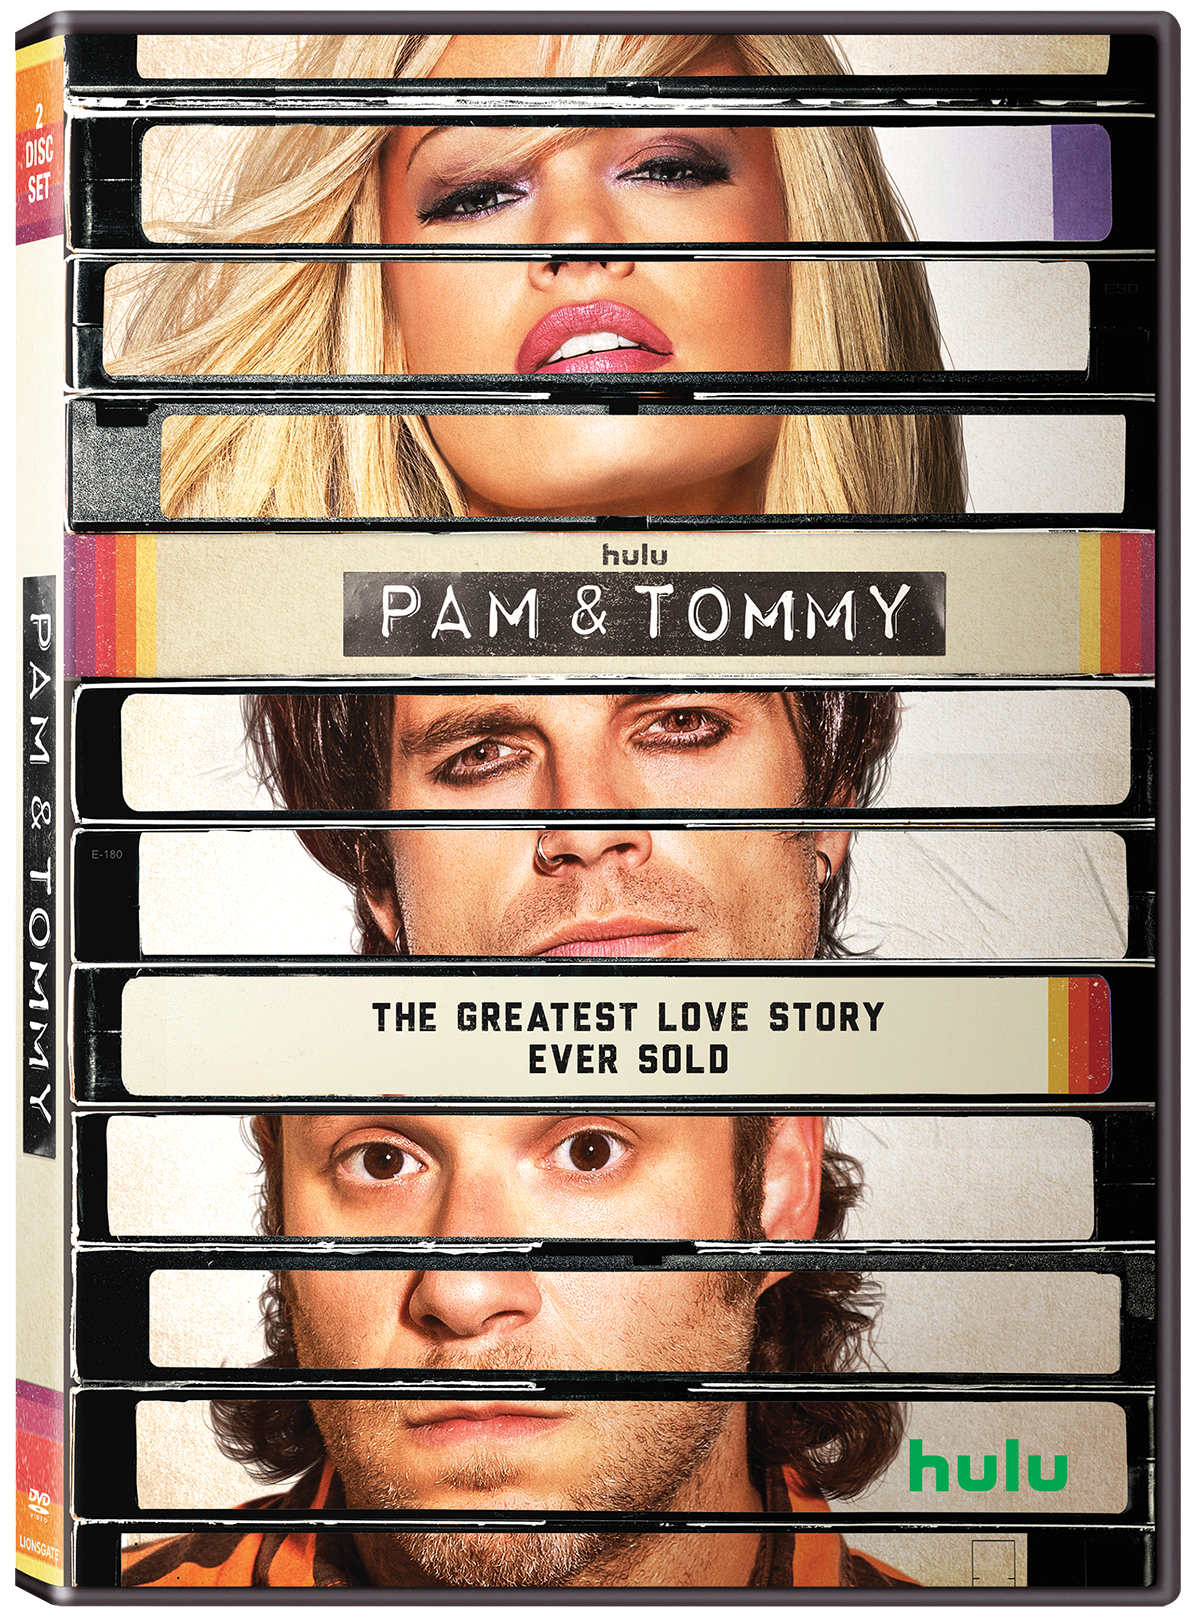 Hulu's Pam and Tommy on DVD